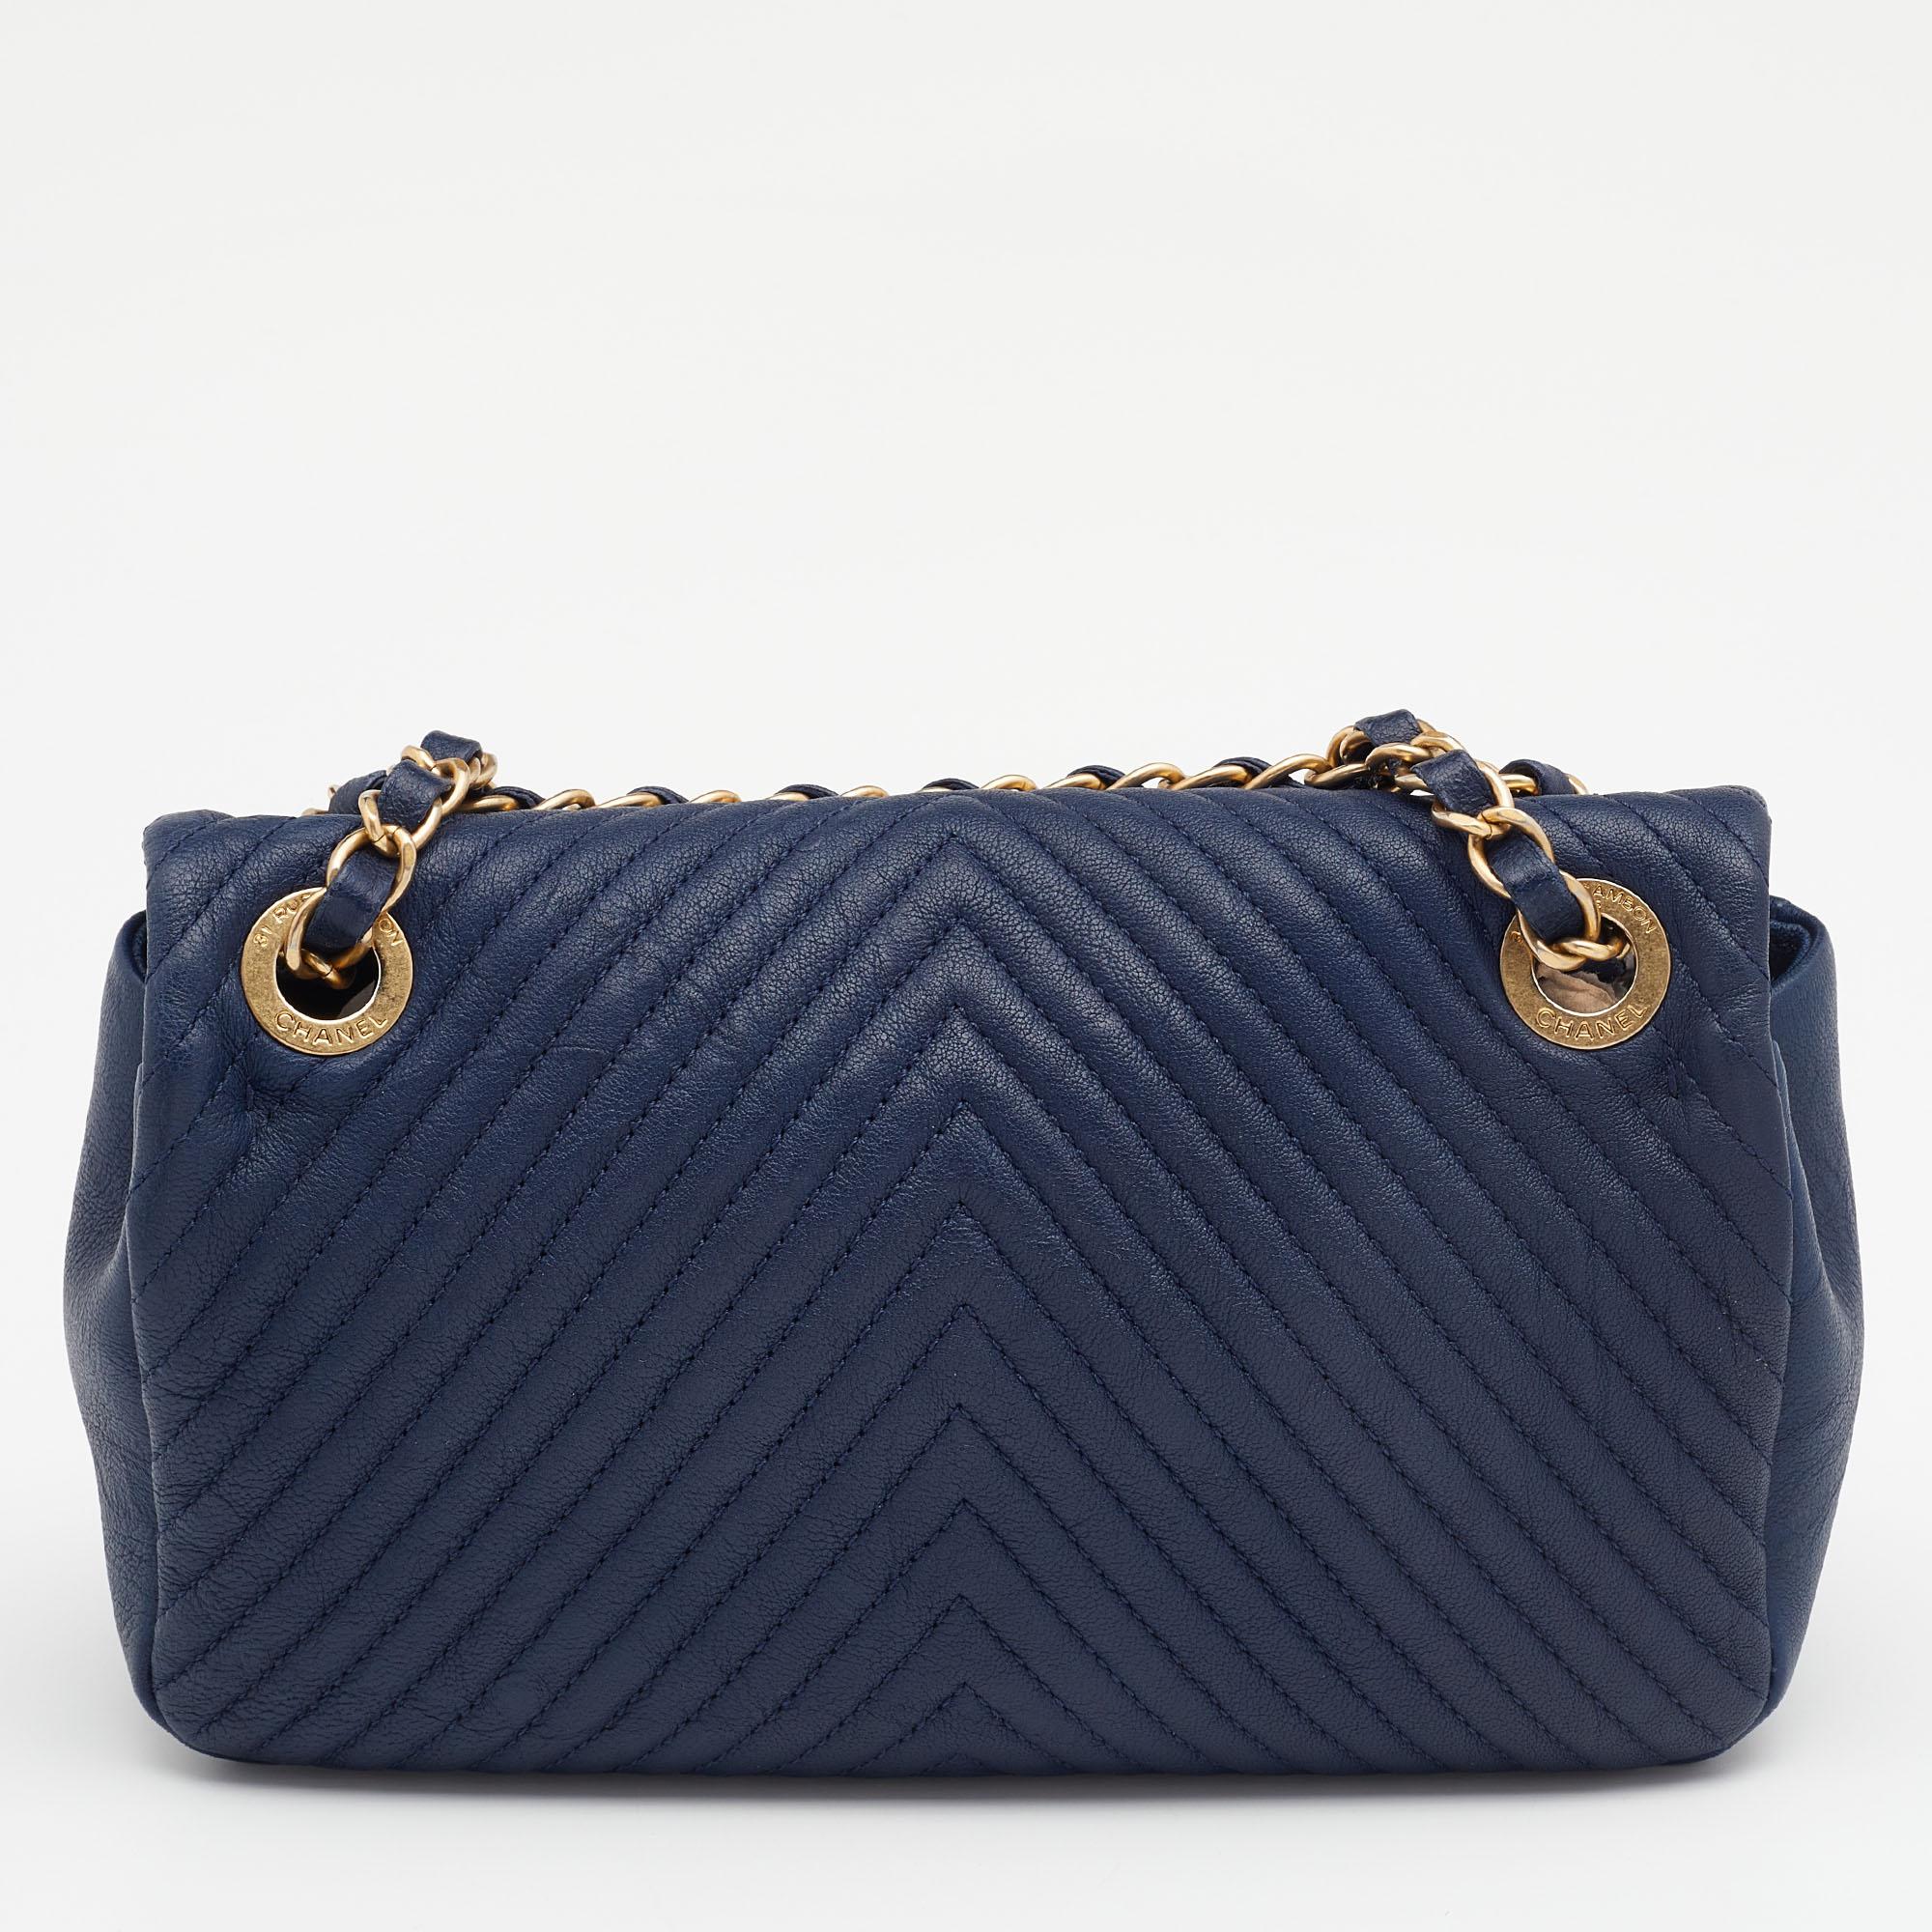 This Chanel flap bag is a favorite among fashionistas! Featuring the signature chevron pattern and the 'CC' logo on the leather exterior, this navy blue bag has a luxe look. Equipped with a chain-link strap and a spacious interior for all your